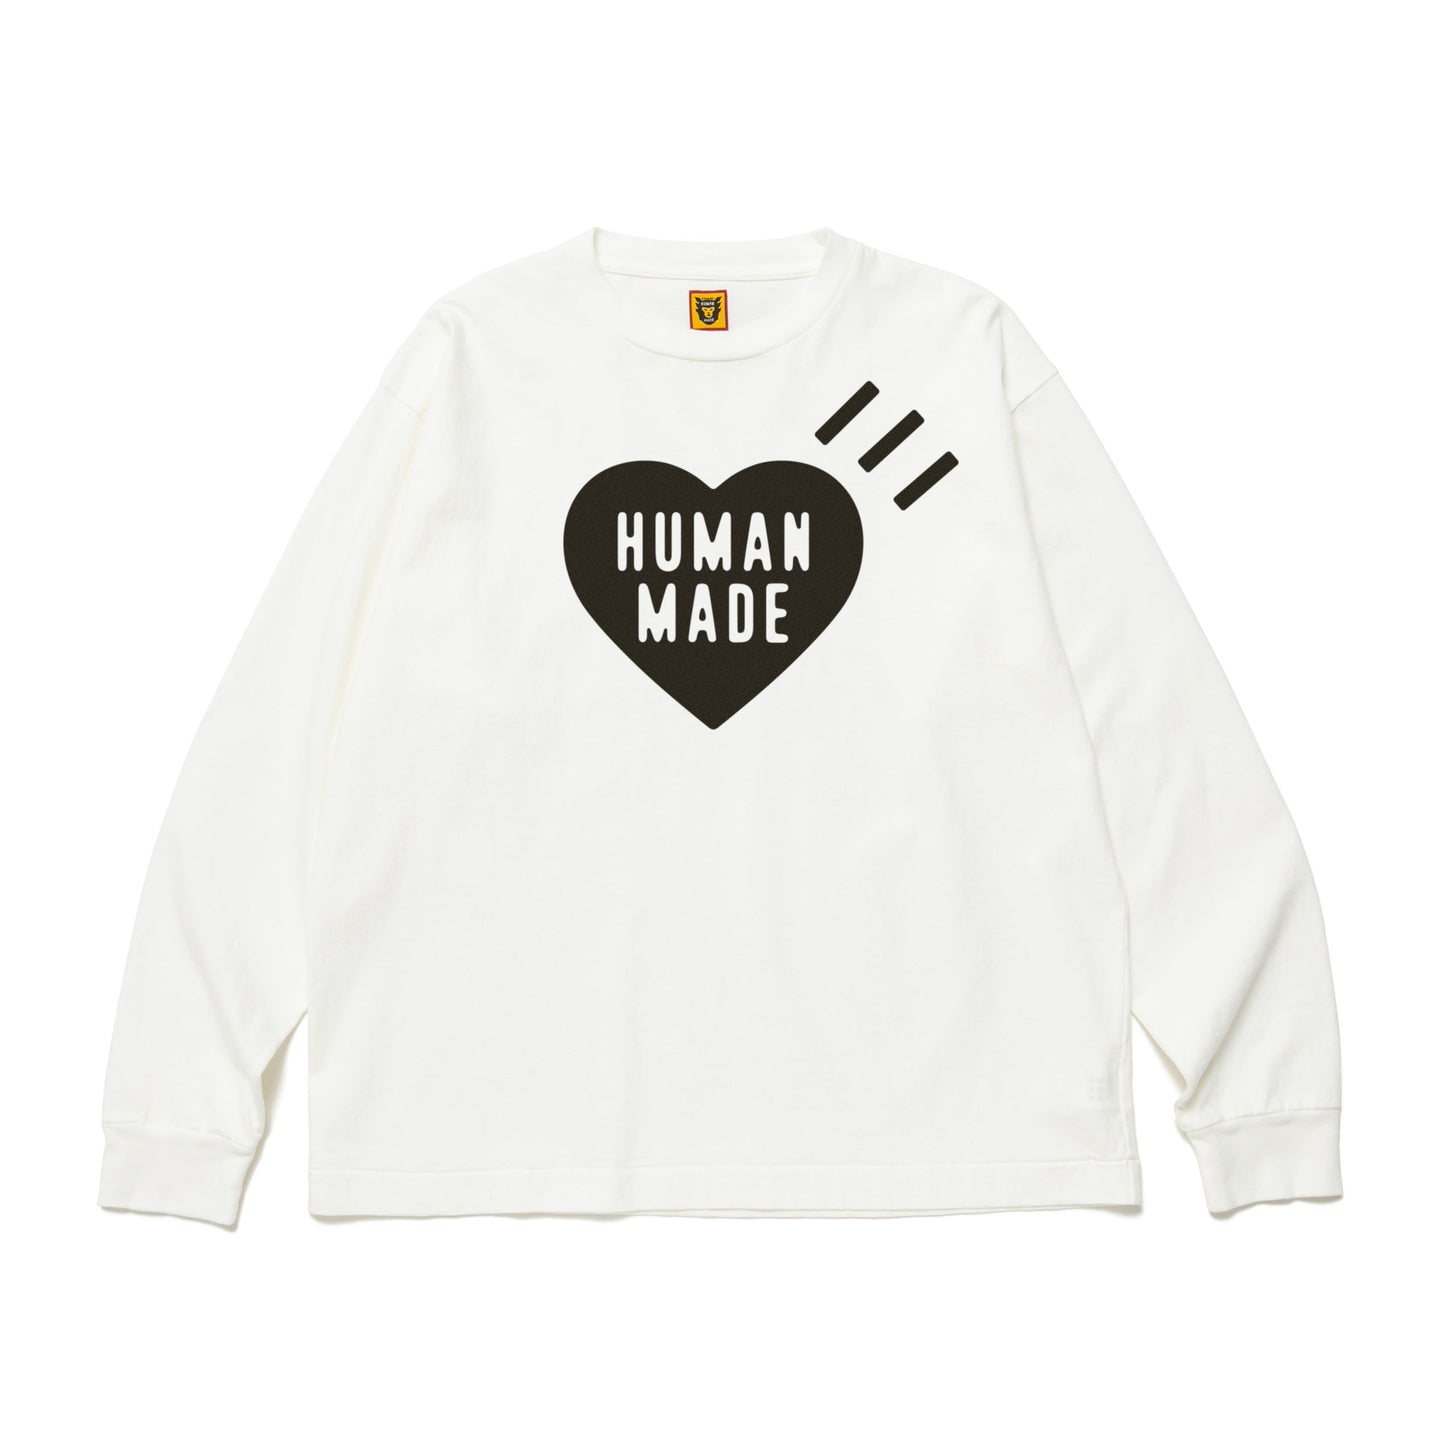 HUMANMADE Wasted Youth T-SHIRT#4 White S